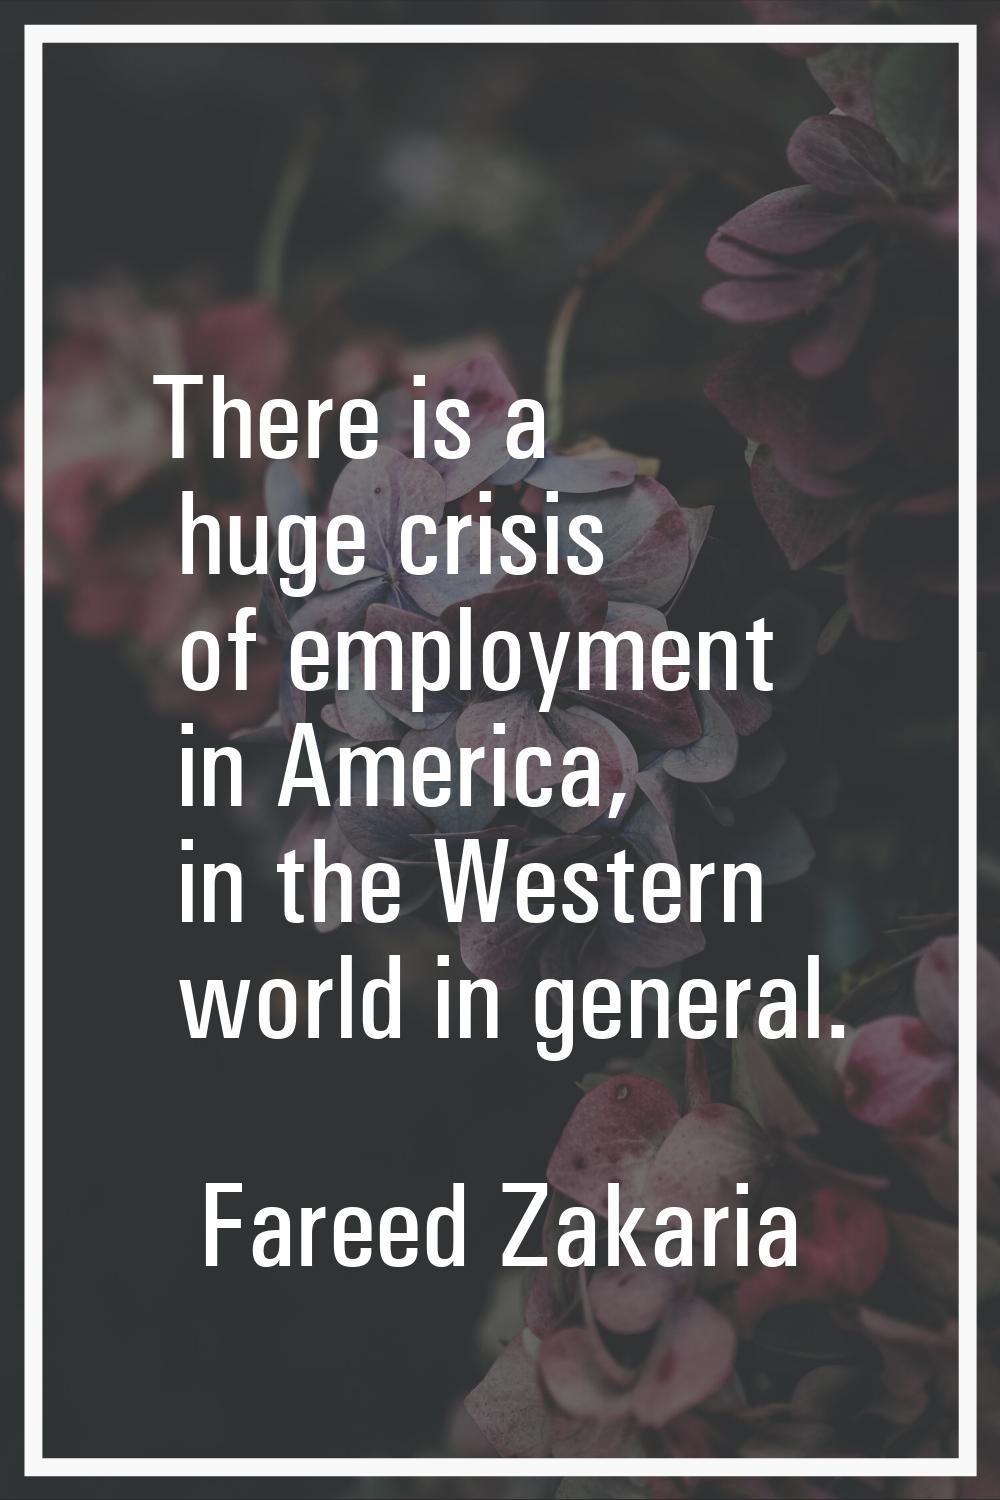 There is a huge crisis of employment in America, in the Western world in general.